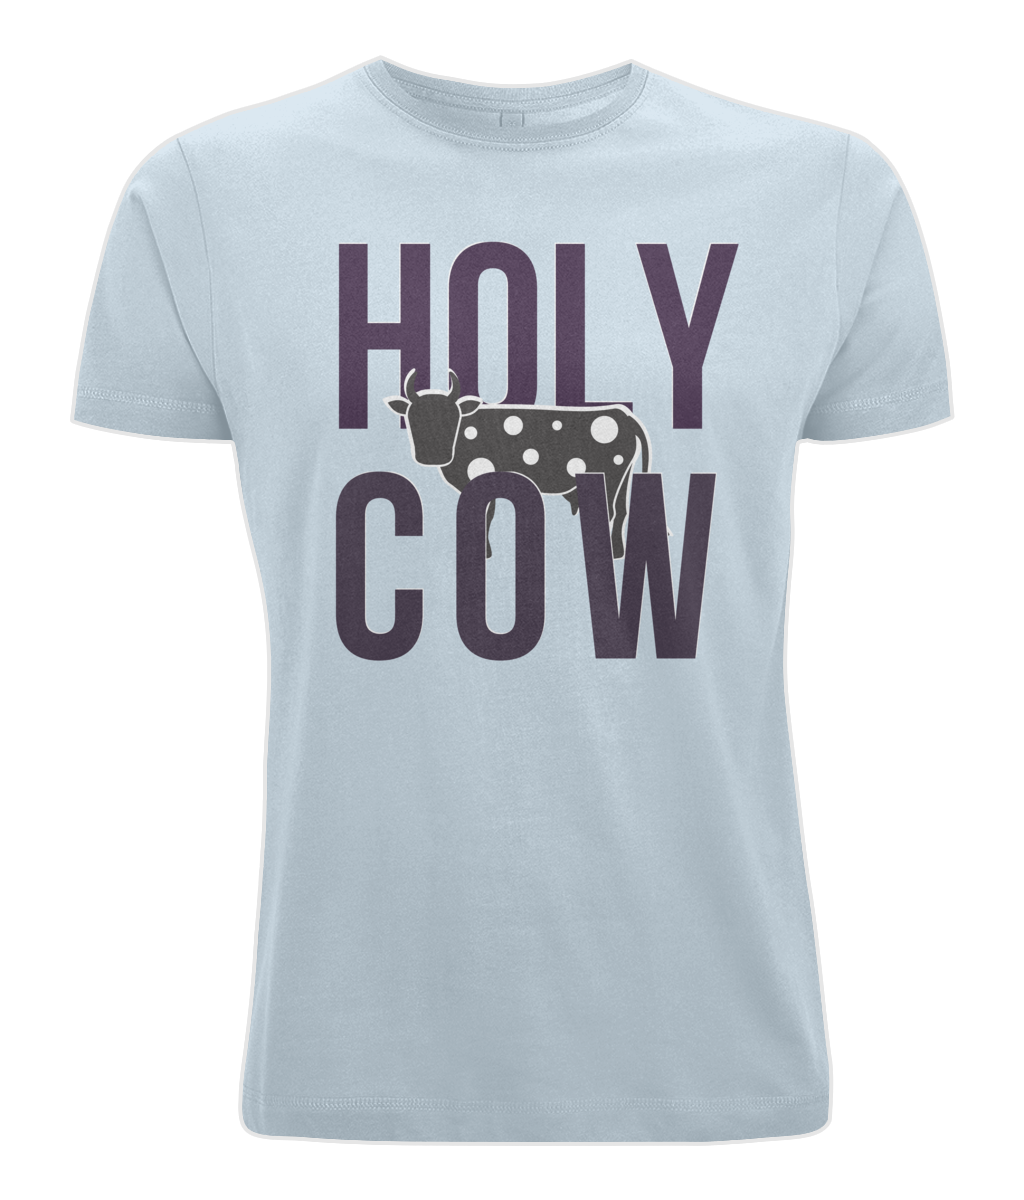 Holy Cow - Unisex Cotton Tee